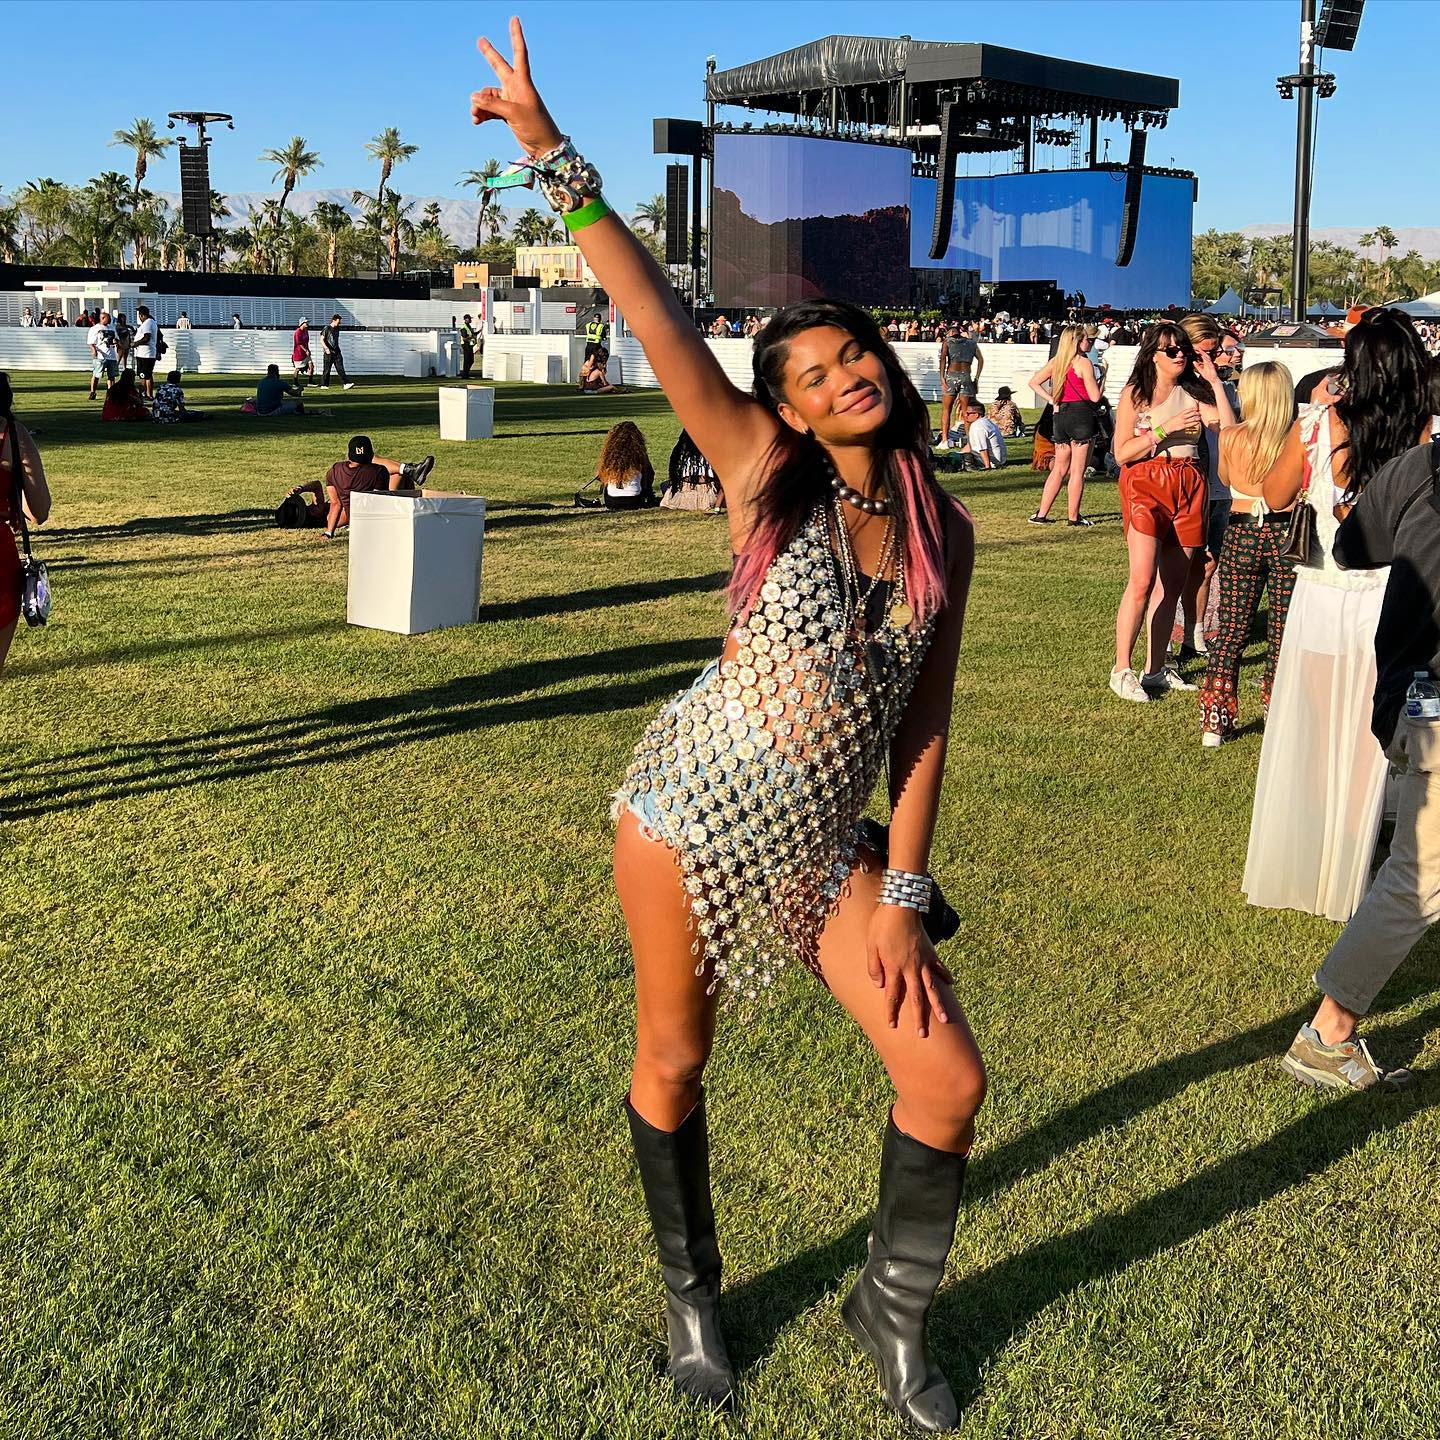 Chanel Iman Stars Take Over the 1st Weekend of Coachella 2022